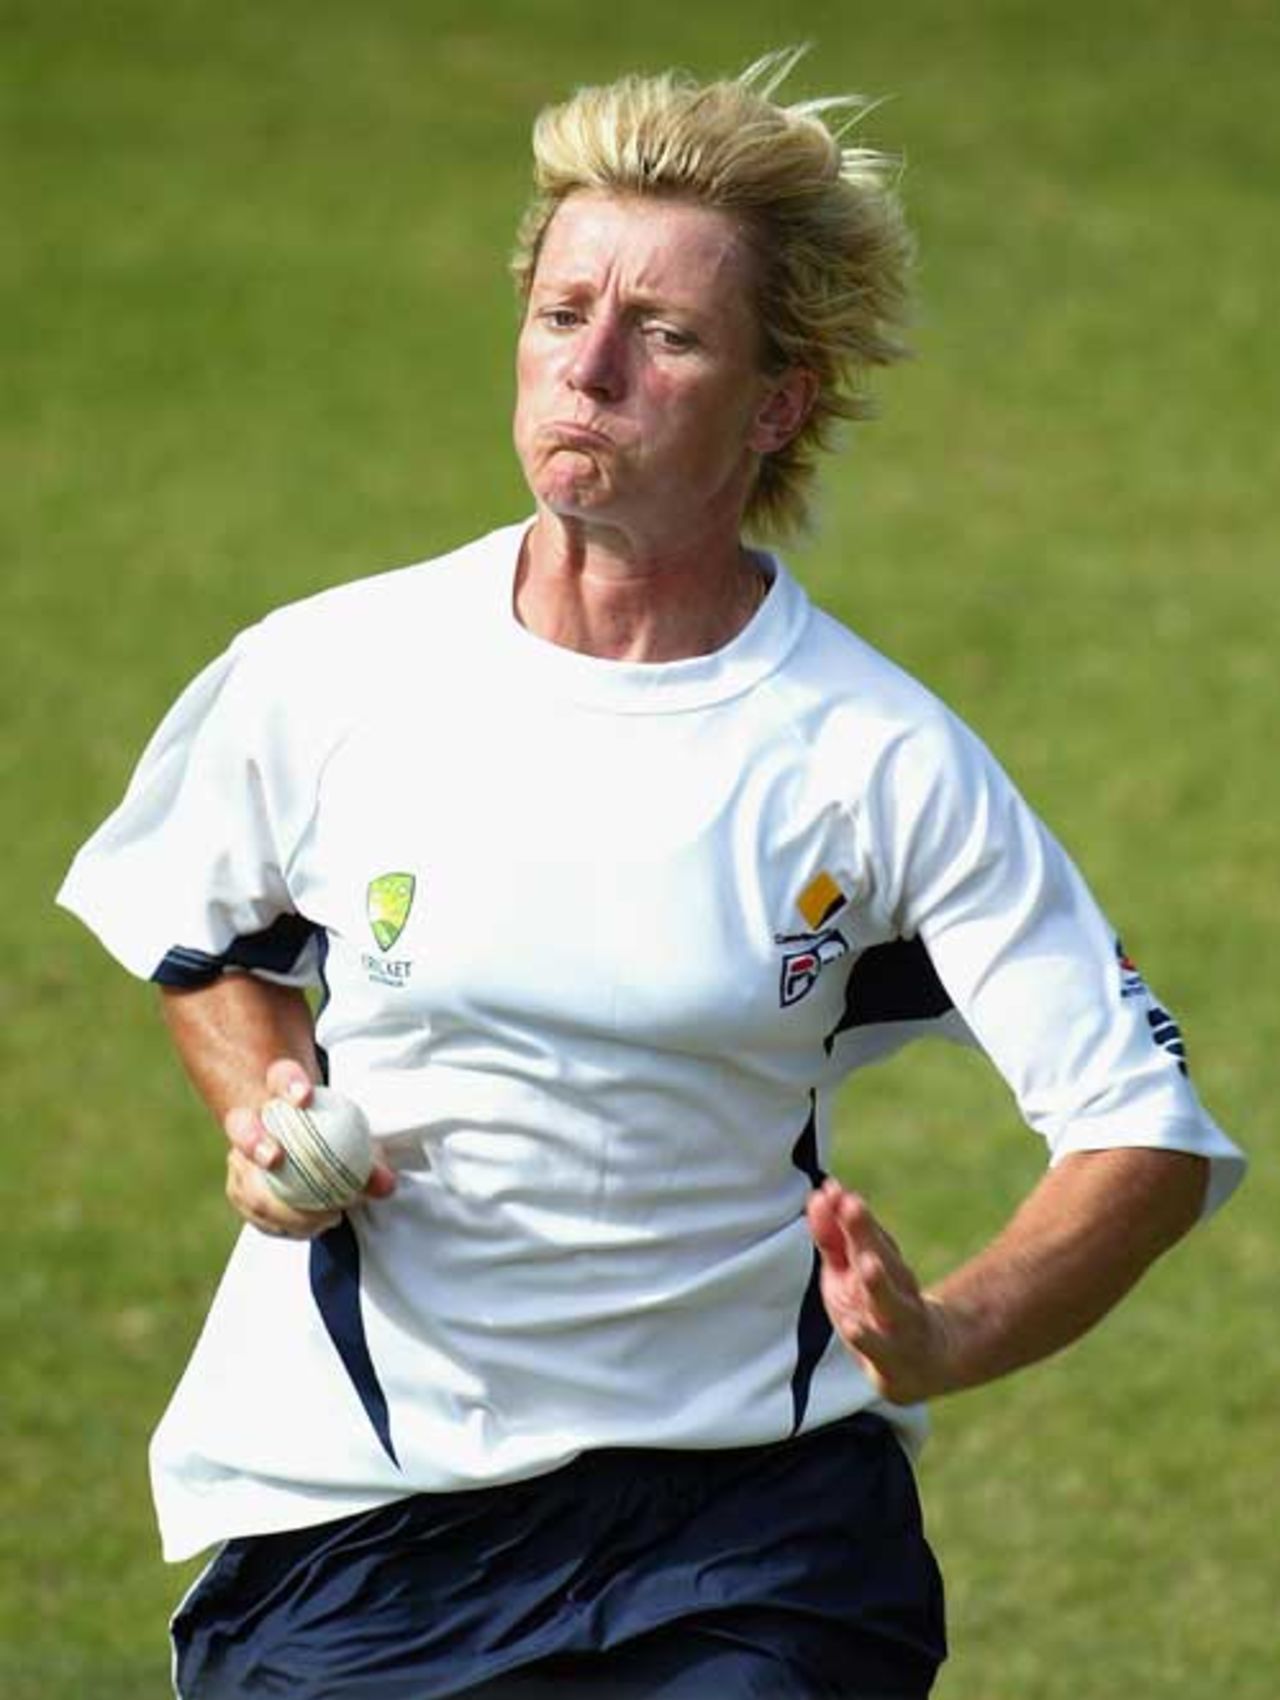 Cathryn Fitzpatrick bowls in training in Perth before the start of the Rose Bowl Womens International ODI Series, between Australia and New Zealand, March 9, 2005
